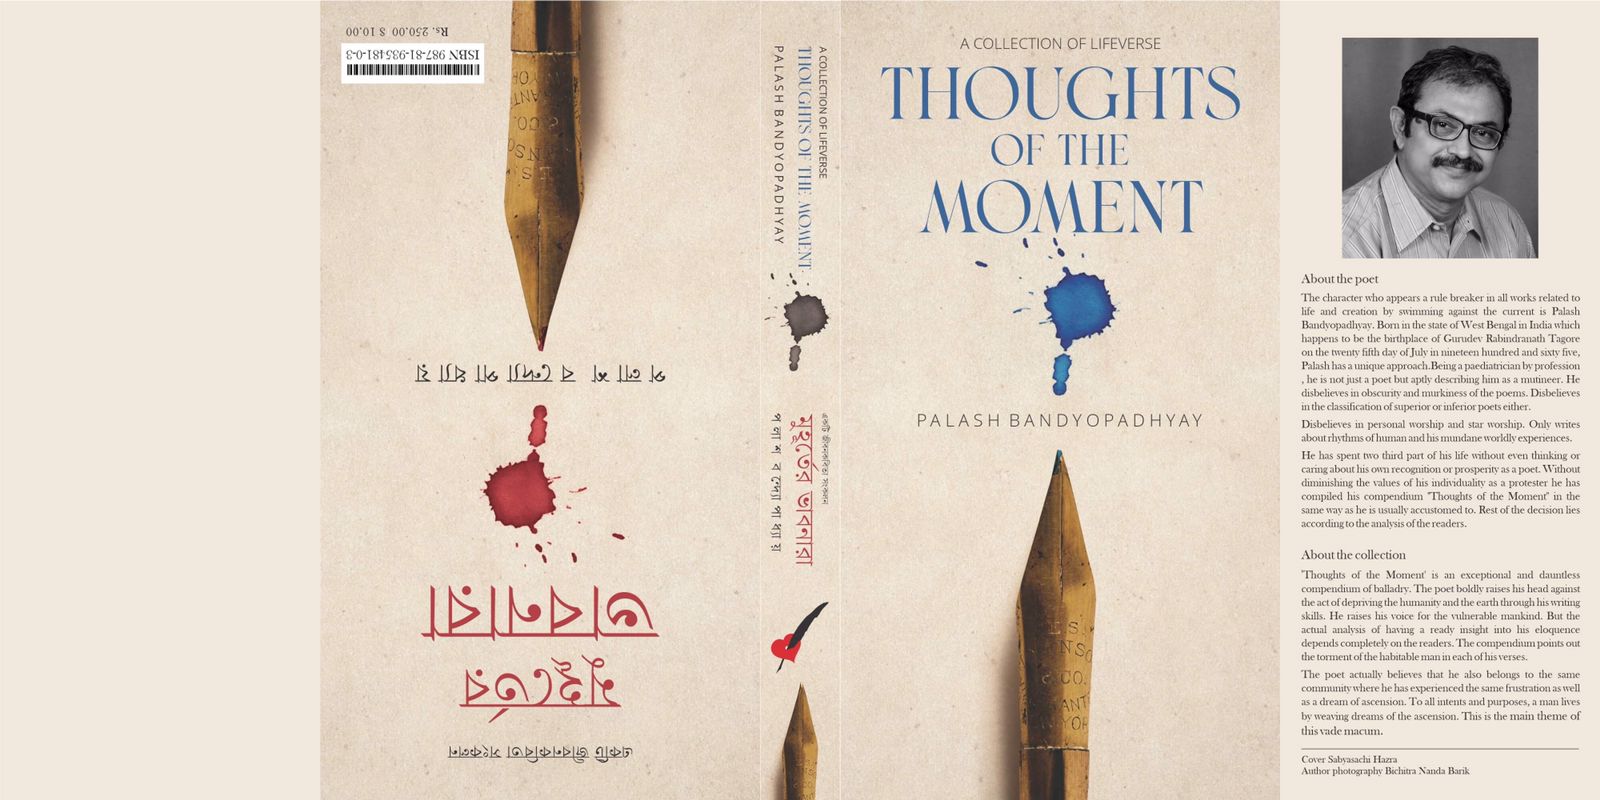 Thoughts of the Moment By Dr. Palash Bandyopadhyay